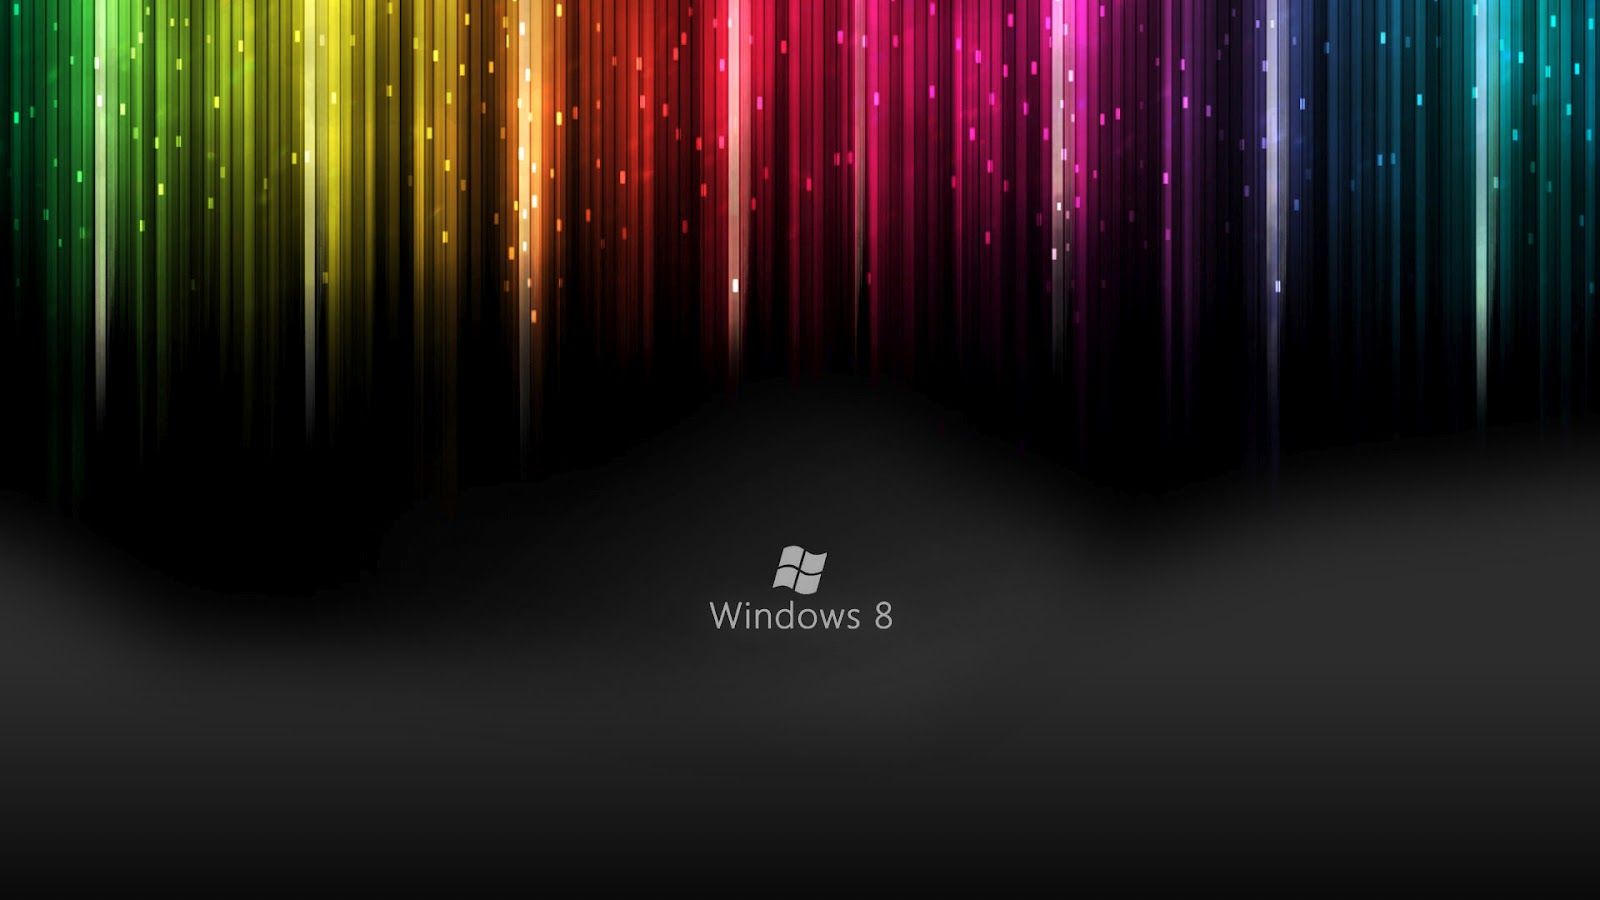 Background for Windows 8 | Hd Wallpapers